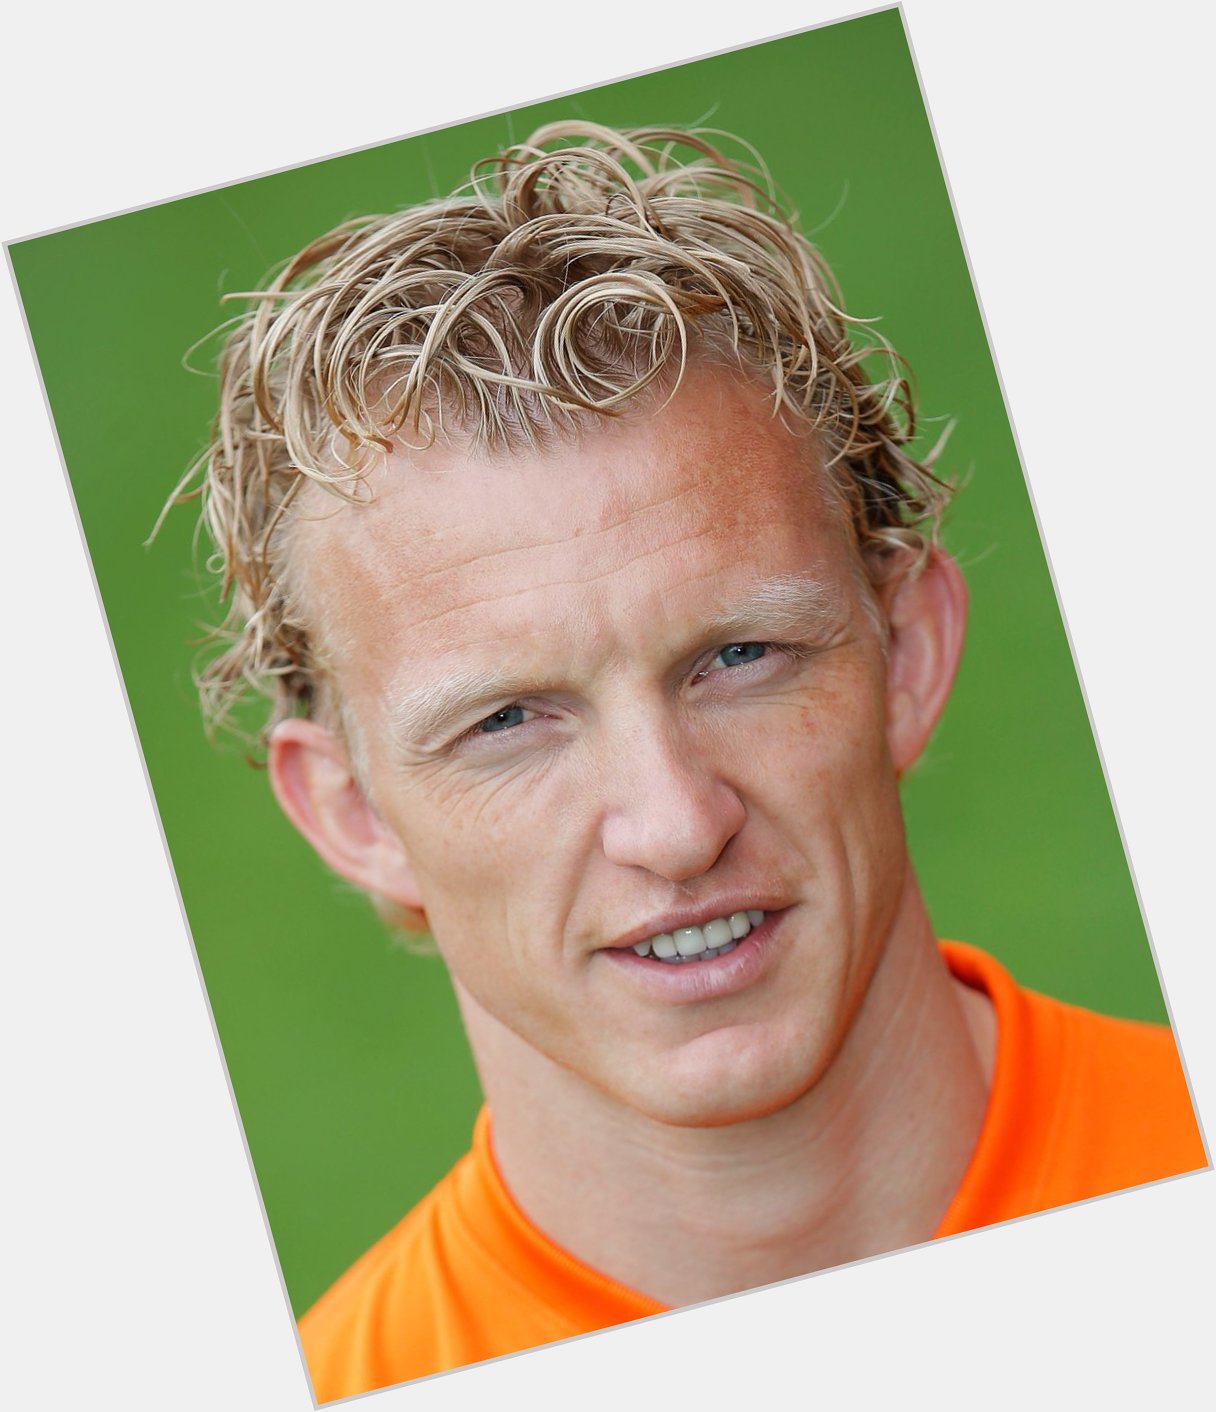 Happy 40th birthday to the one, the only, Dirk Kuyt! 